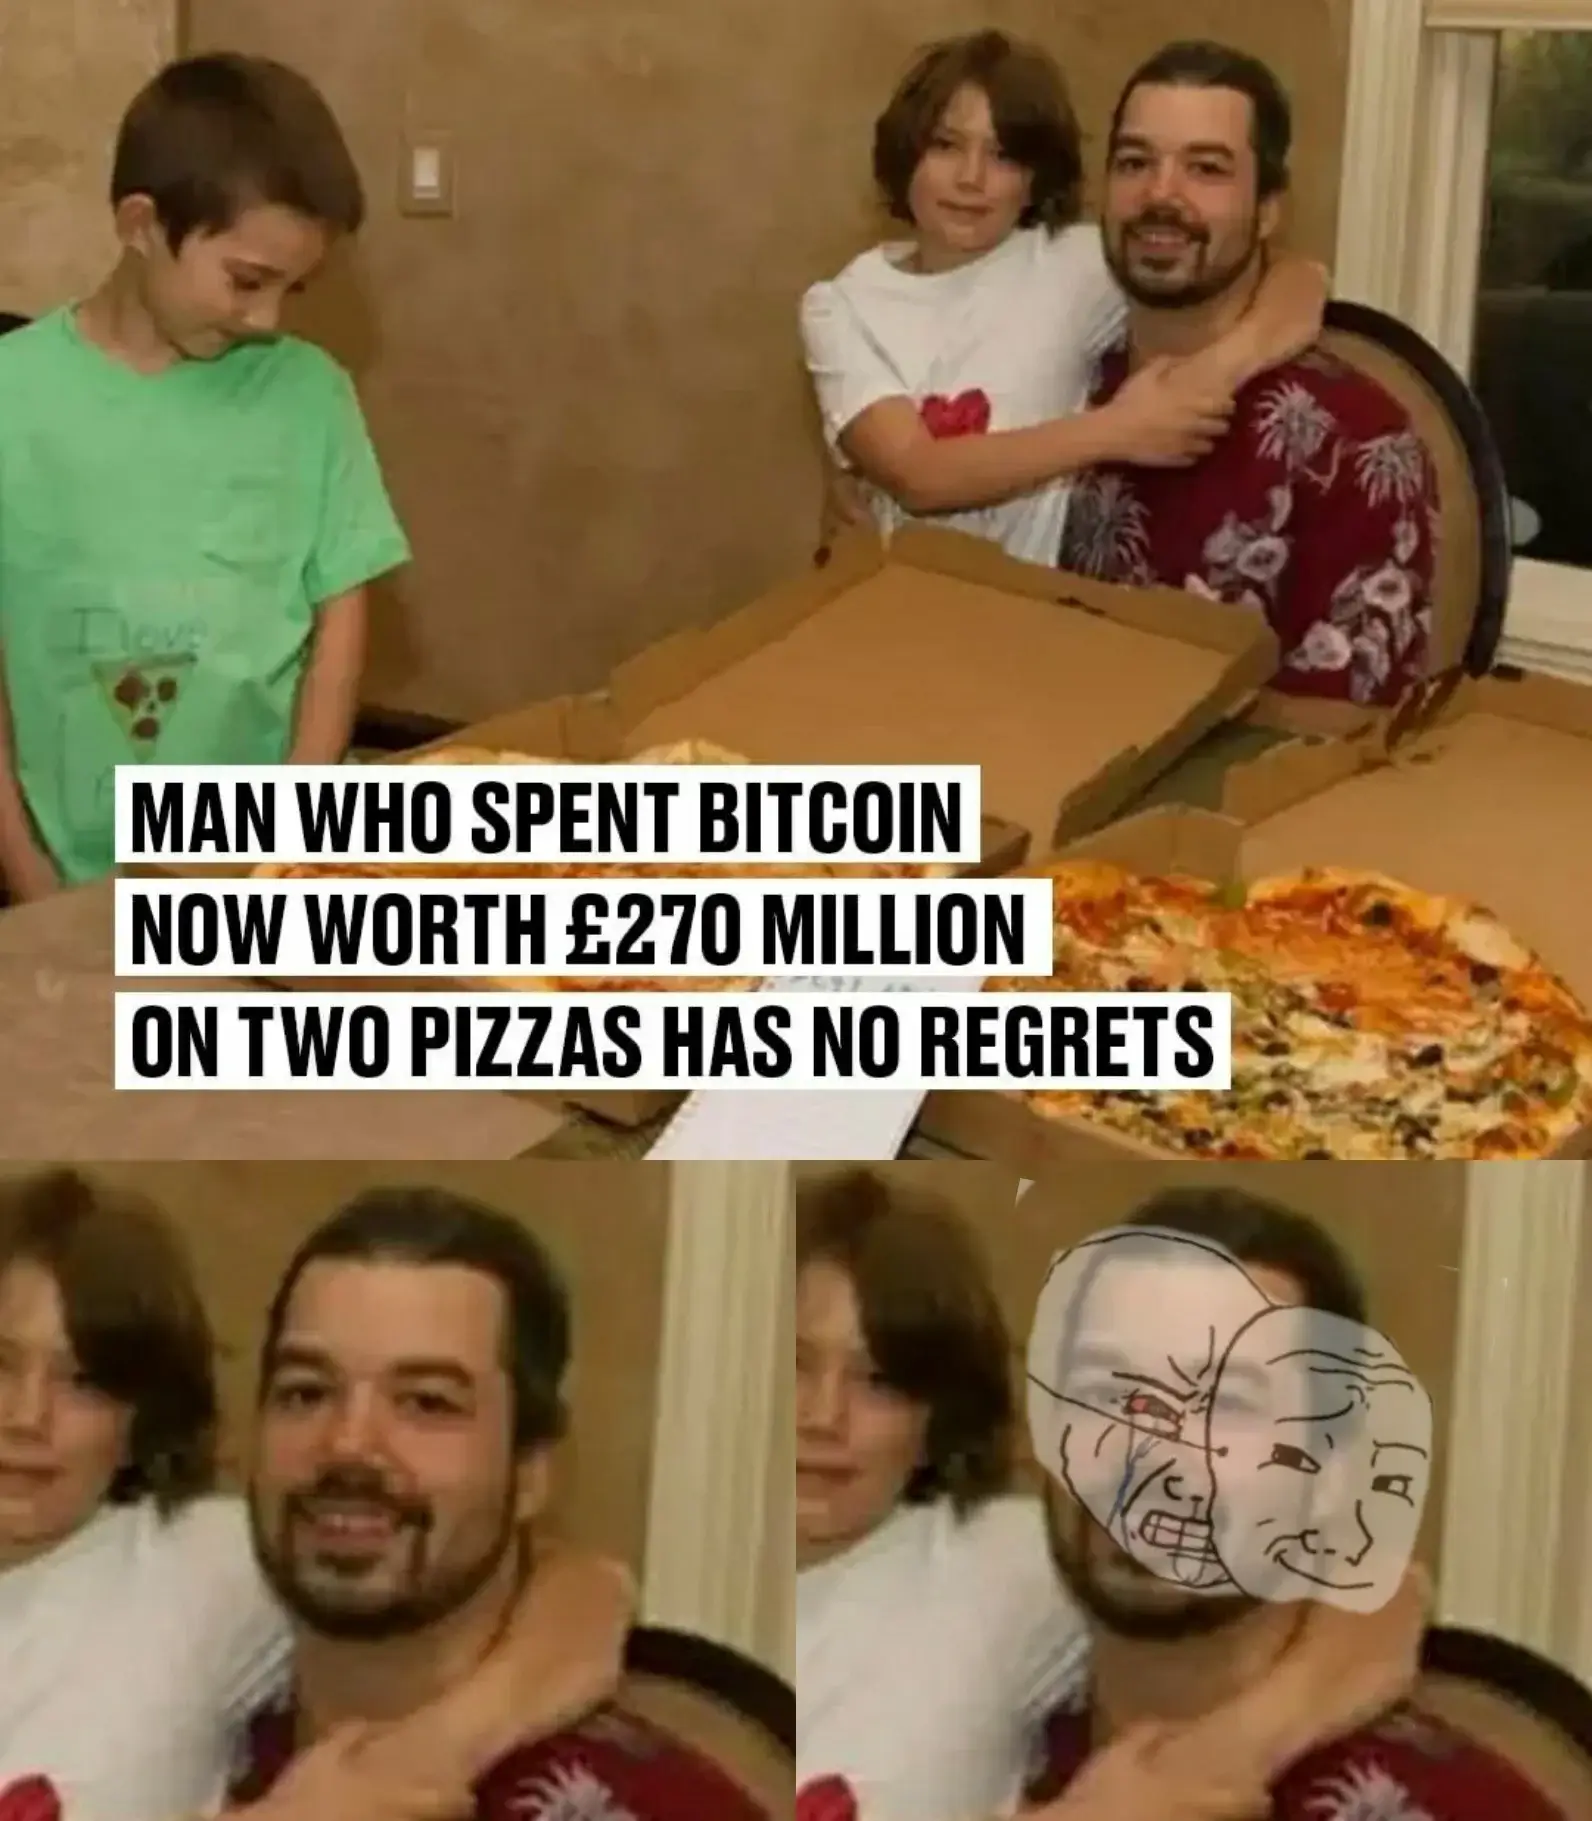 Is a pizza better than being rich?